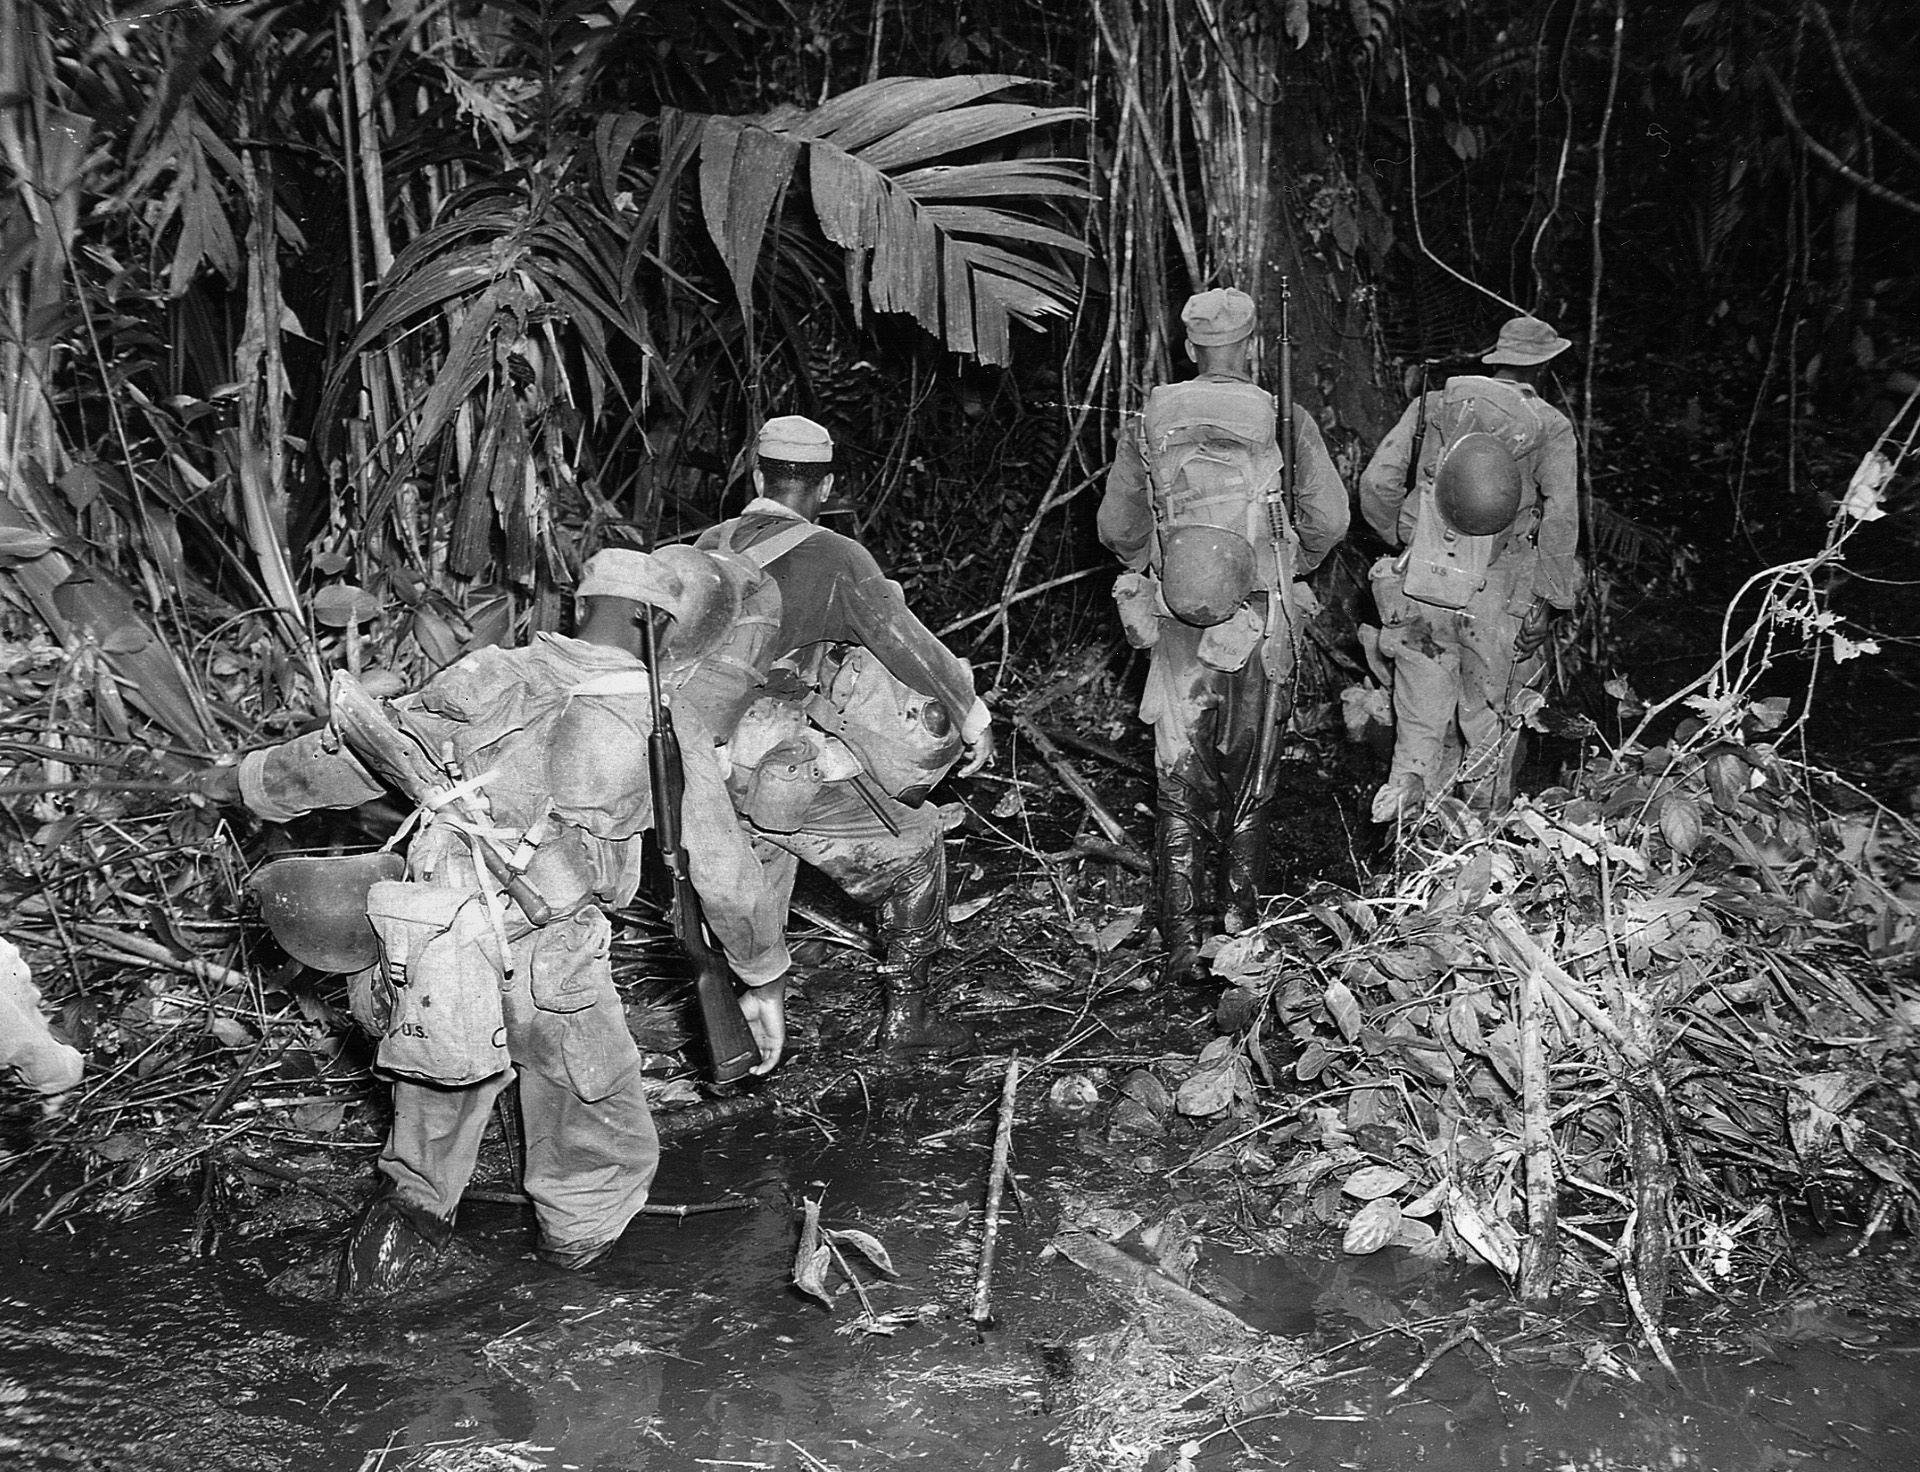 The hot, humid jungle conditions on Bougainville made combat an exhausting, harrowing experience for all troops. Here a patrol from the 25th Regiment slogs along a muddy, enemy-infested trail to reach their objective. 